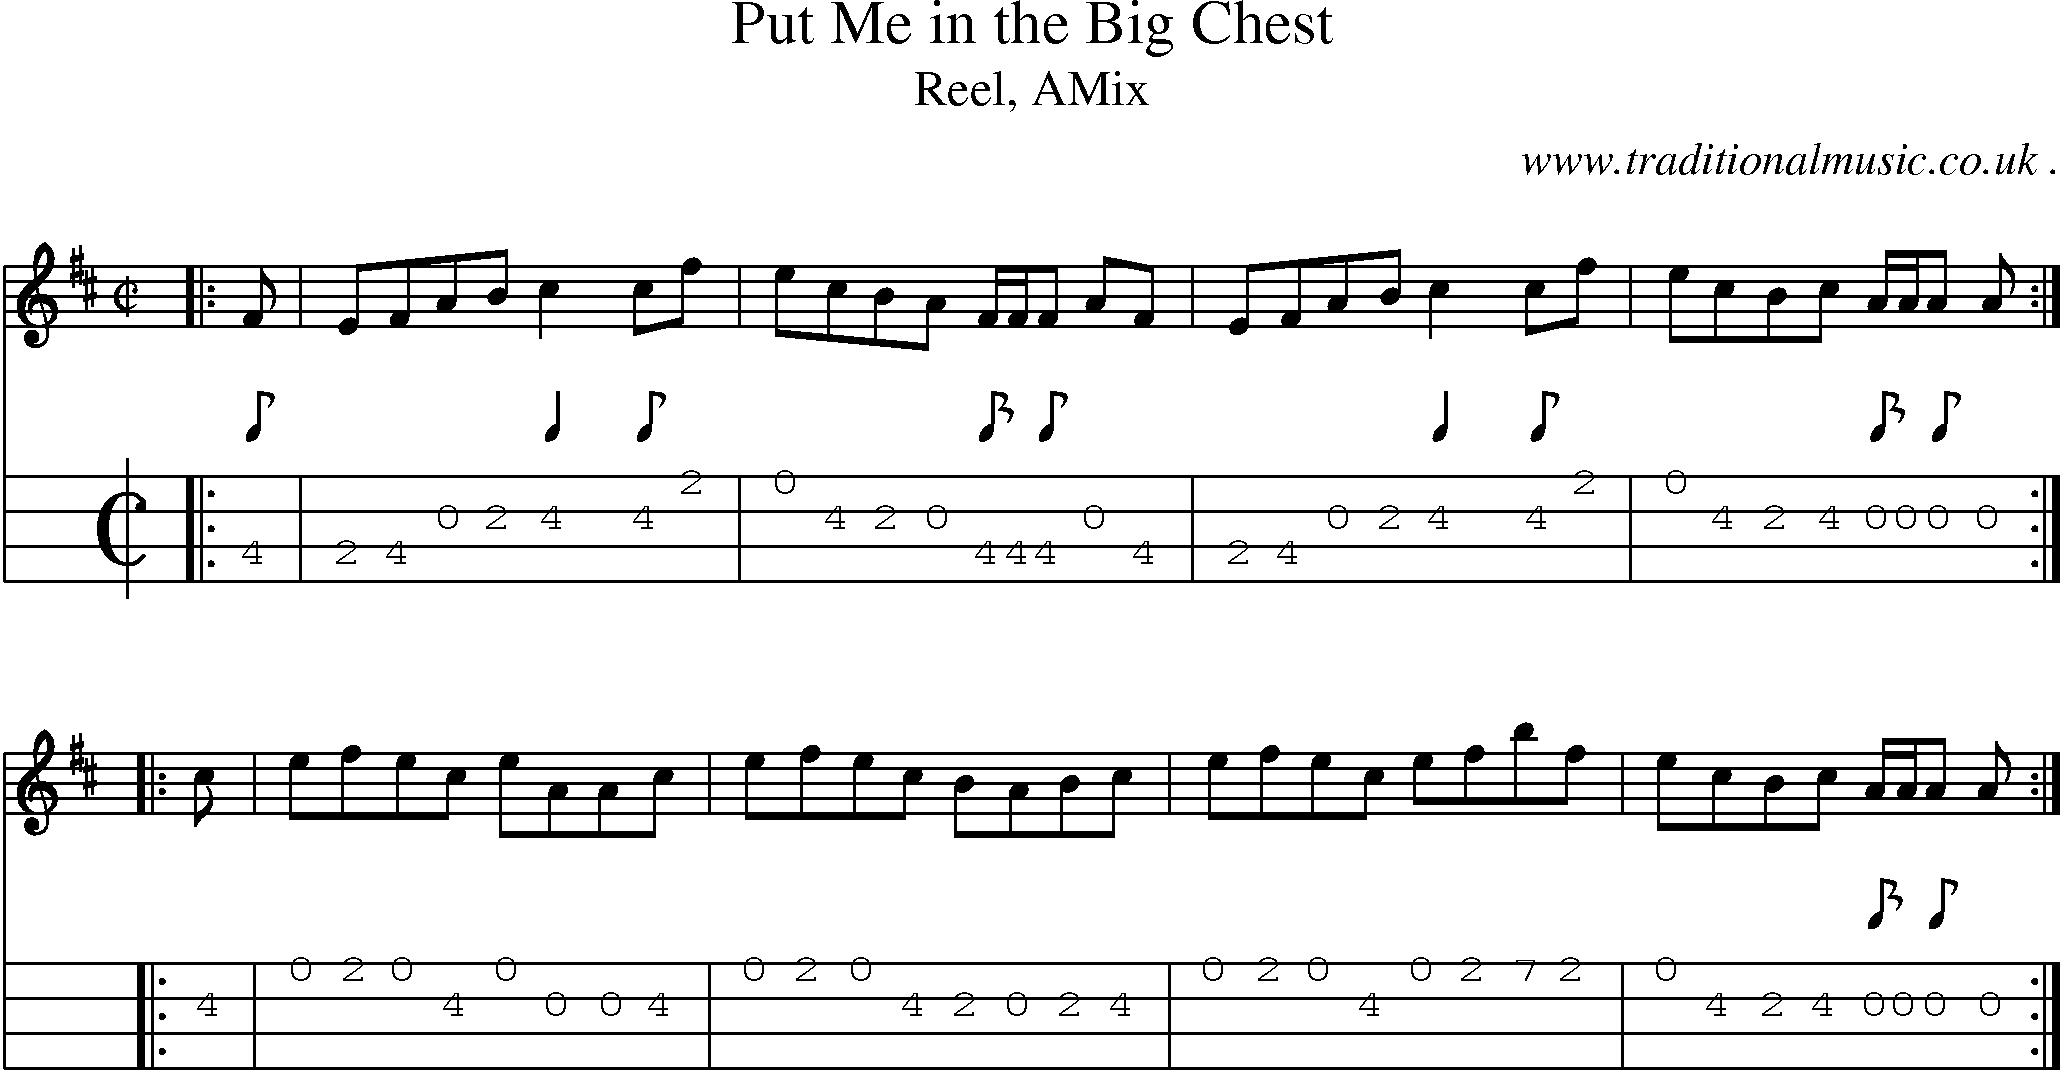 Sheet-music  score, Chords and Mandolin Tabs for Put Me In The Big Chest